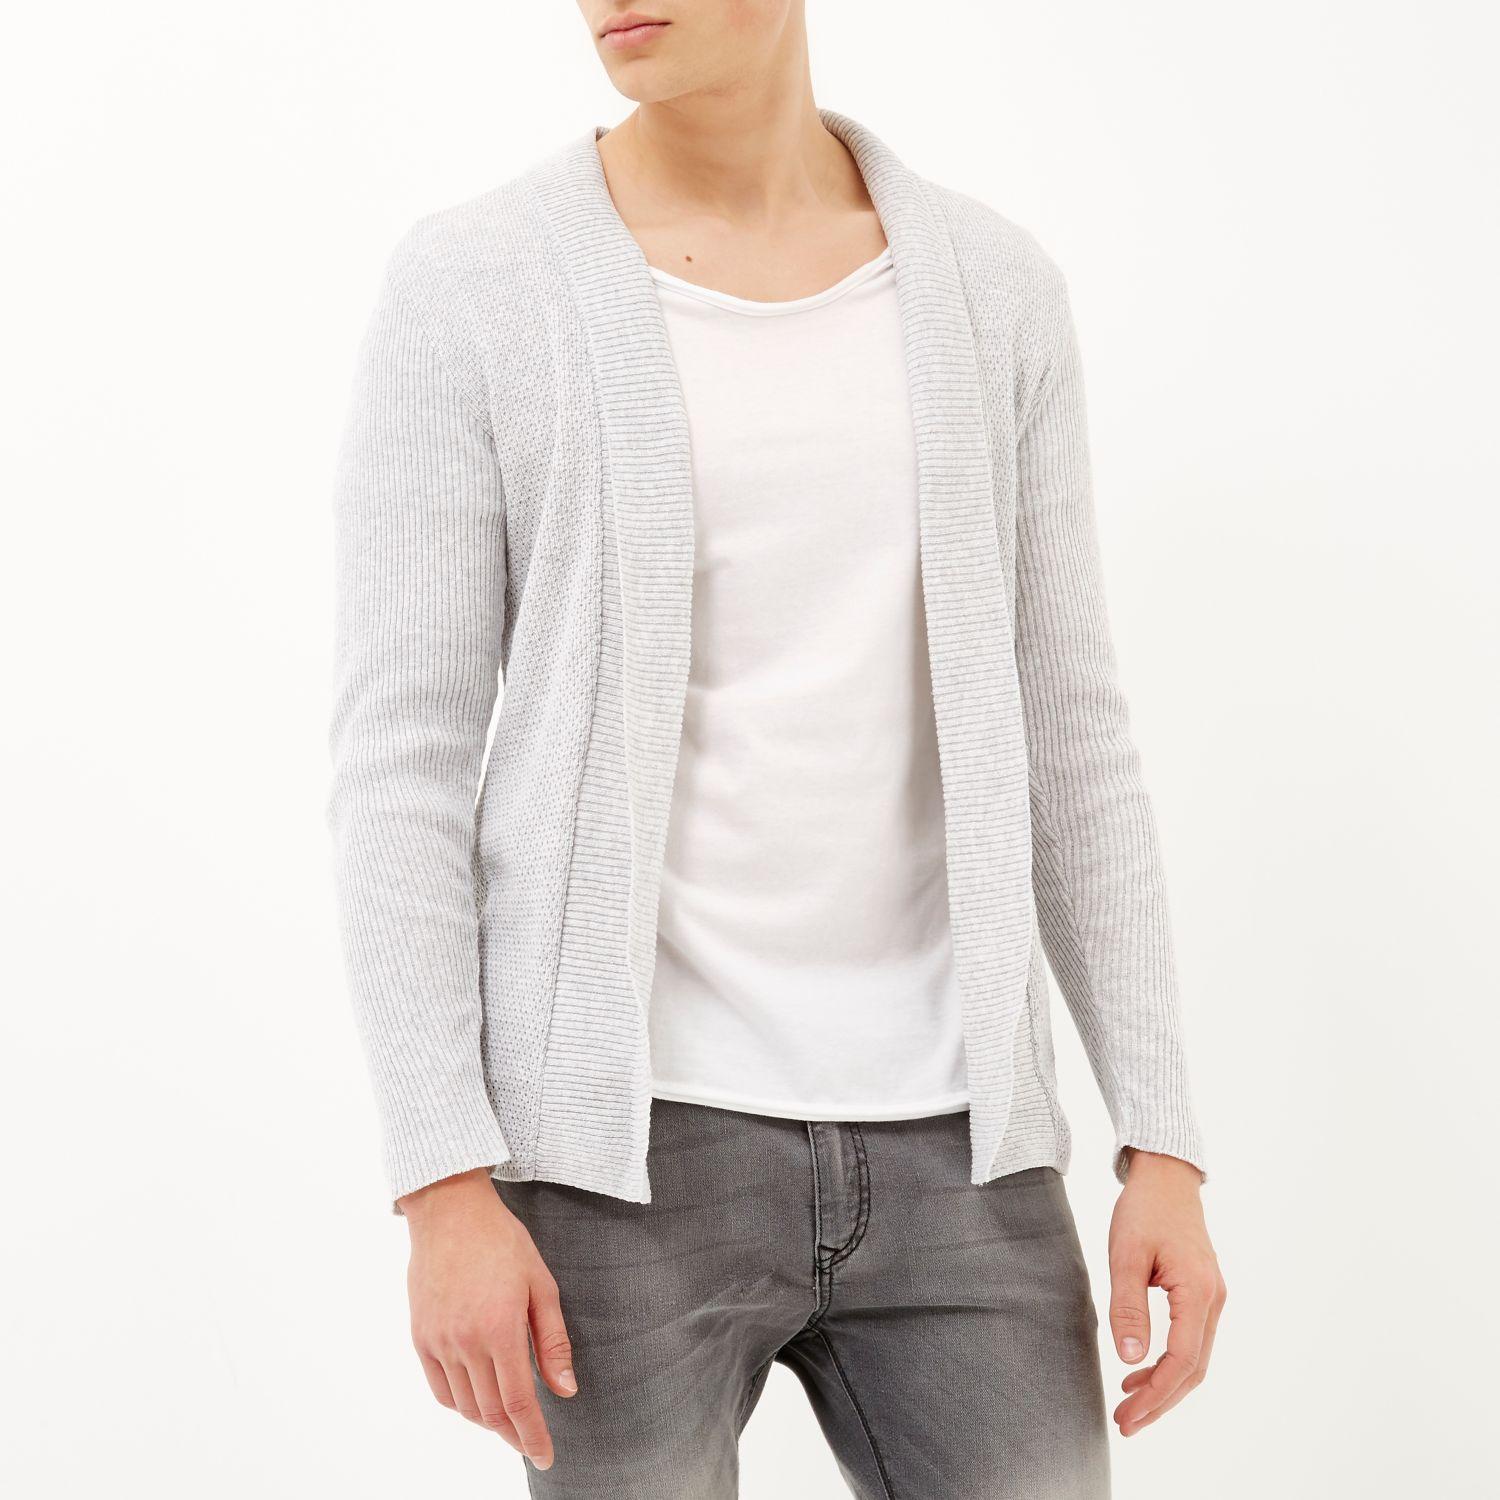 Lyst - River Island Light Grey Open Front Cardigan in Gray for Men